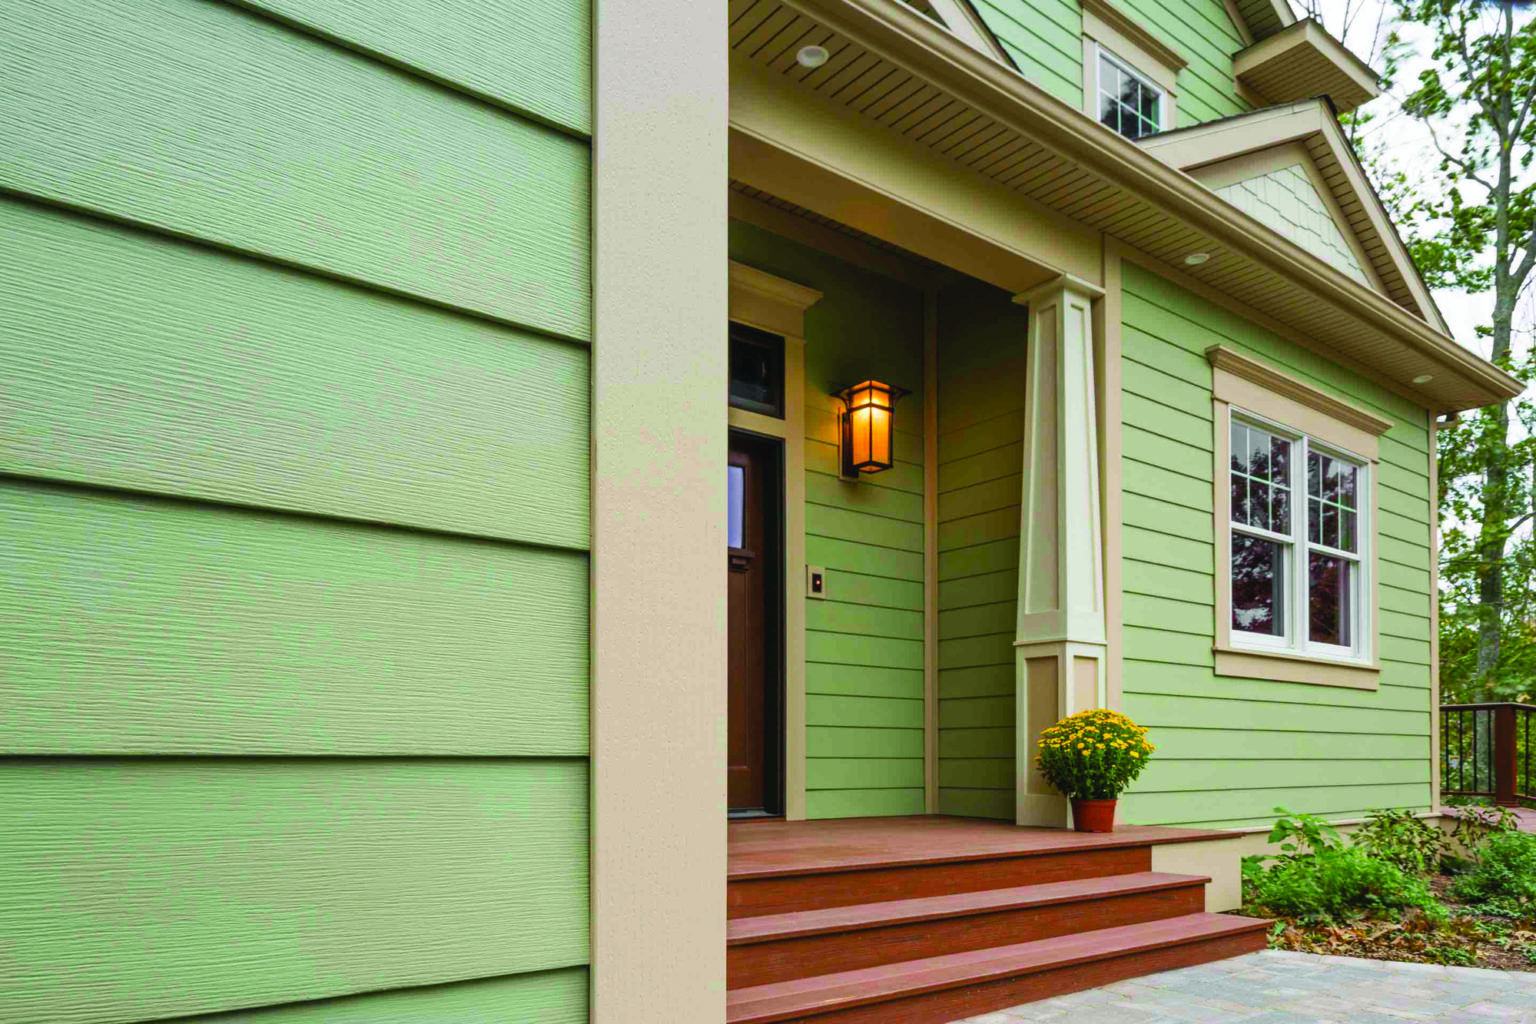 What Widths Does Vinyl Siding Come In Interior Magazine Leading Decoration Design All The 